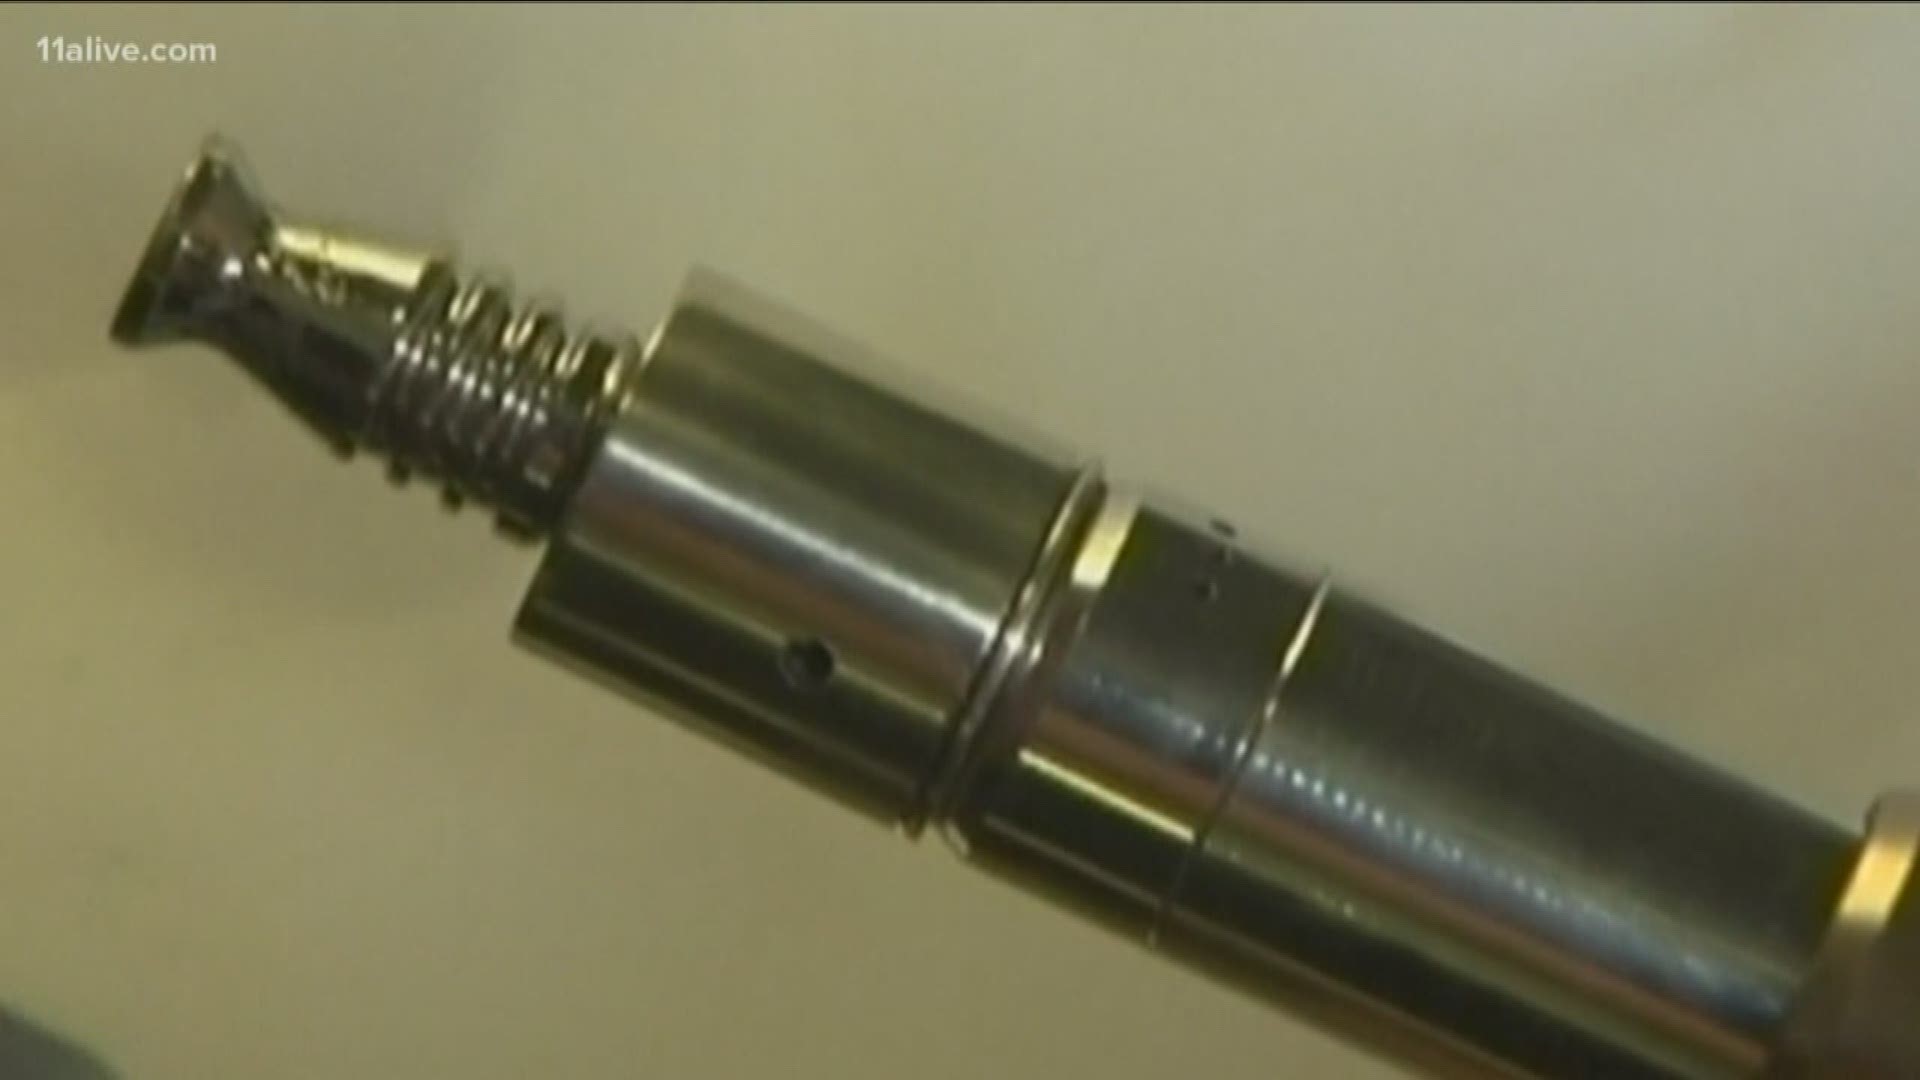 This death is one of nine vaping related illness cases in Georgia.